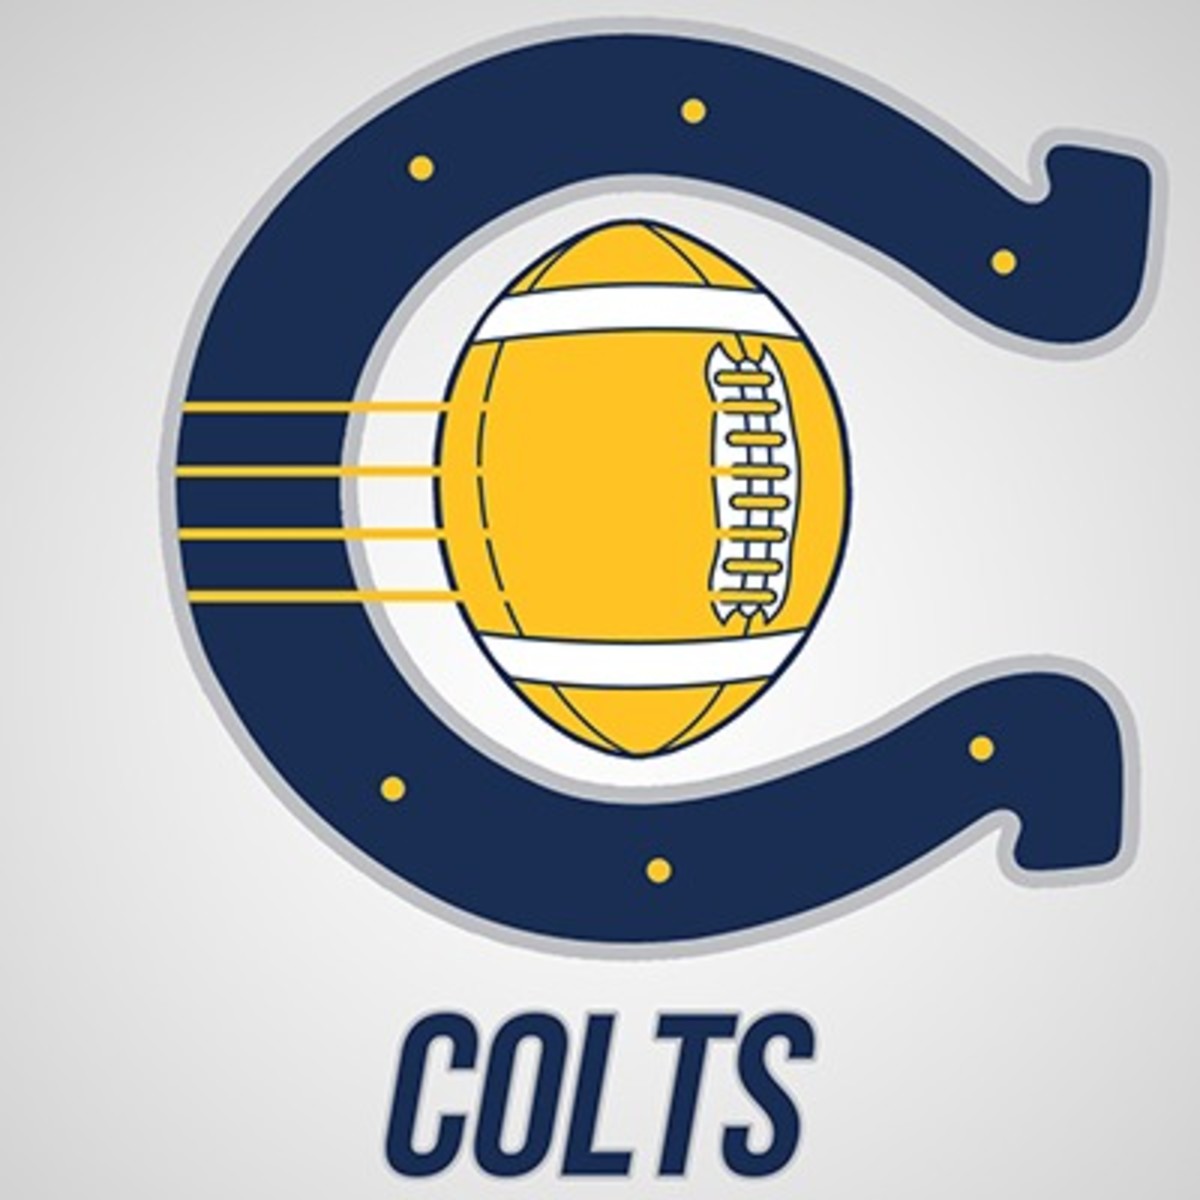 Check Out These Nba X Nfl Logo Mashups Sports Illustrated